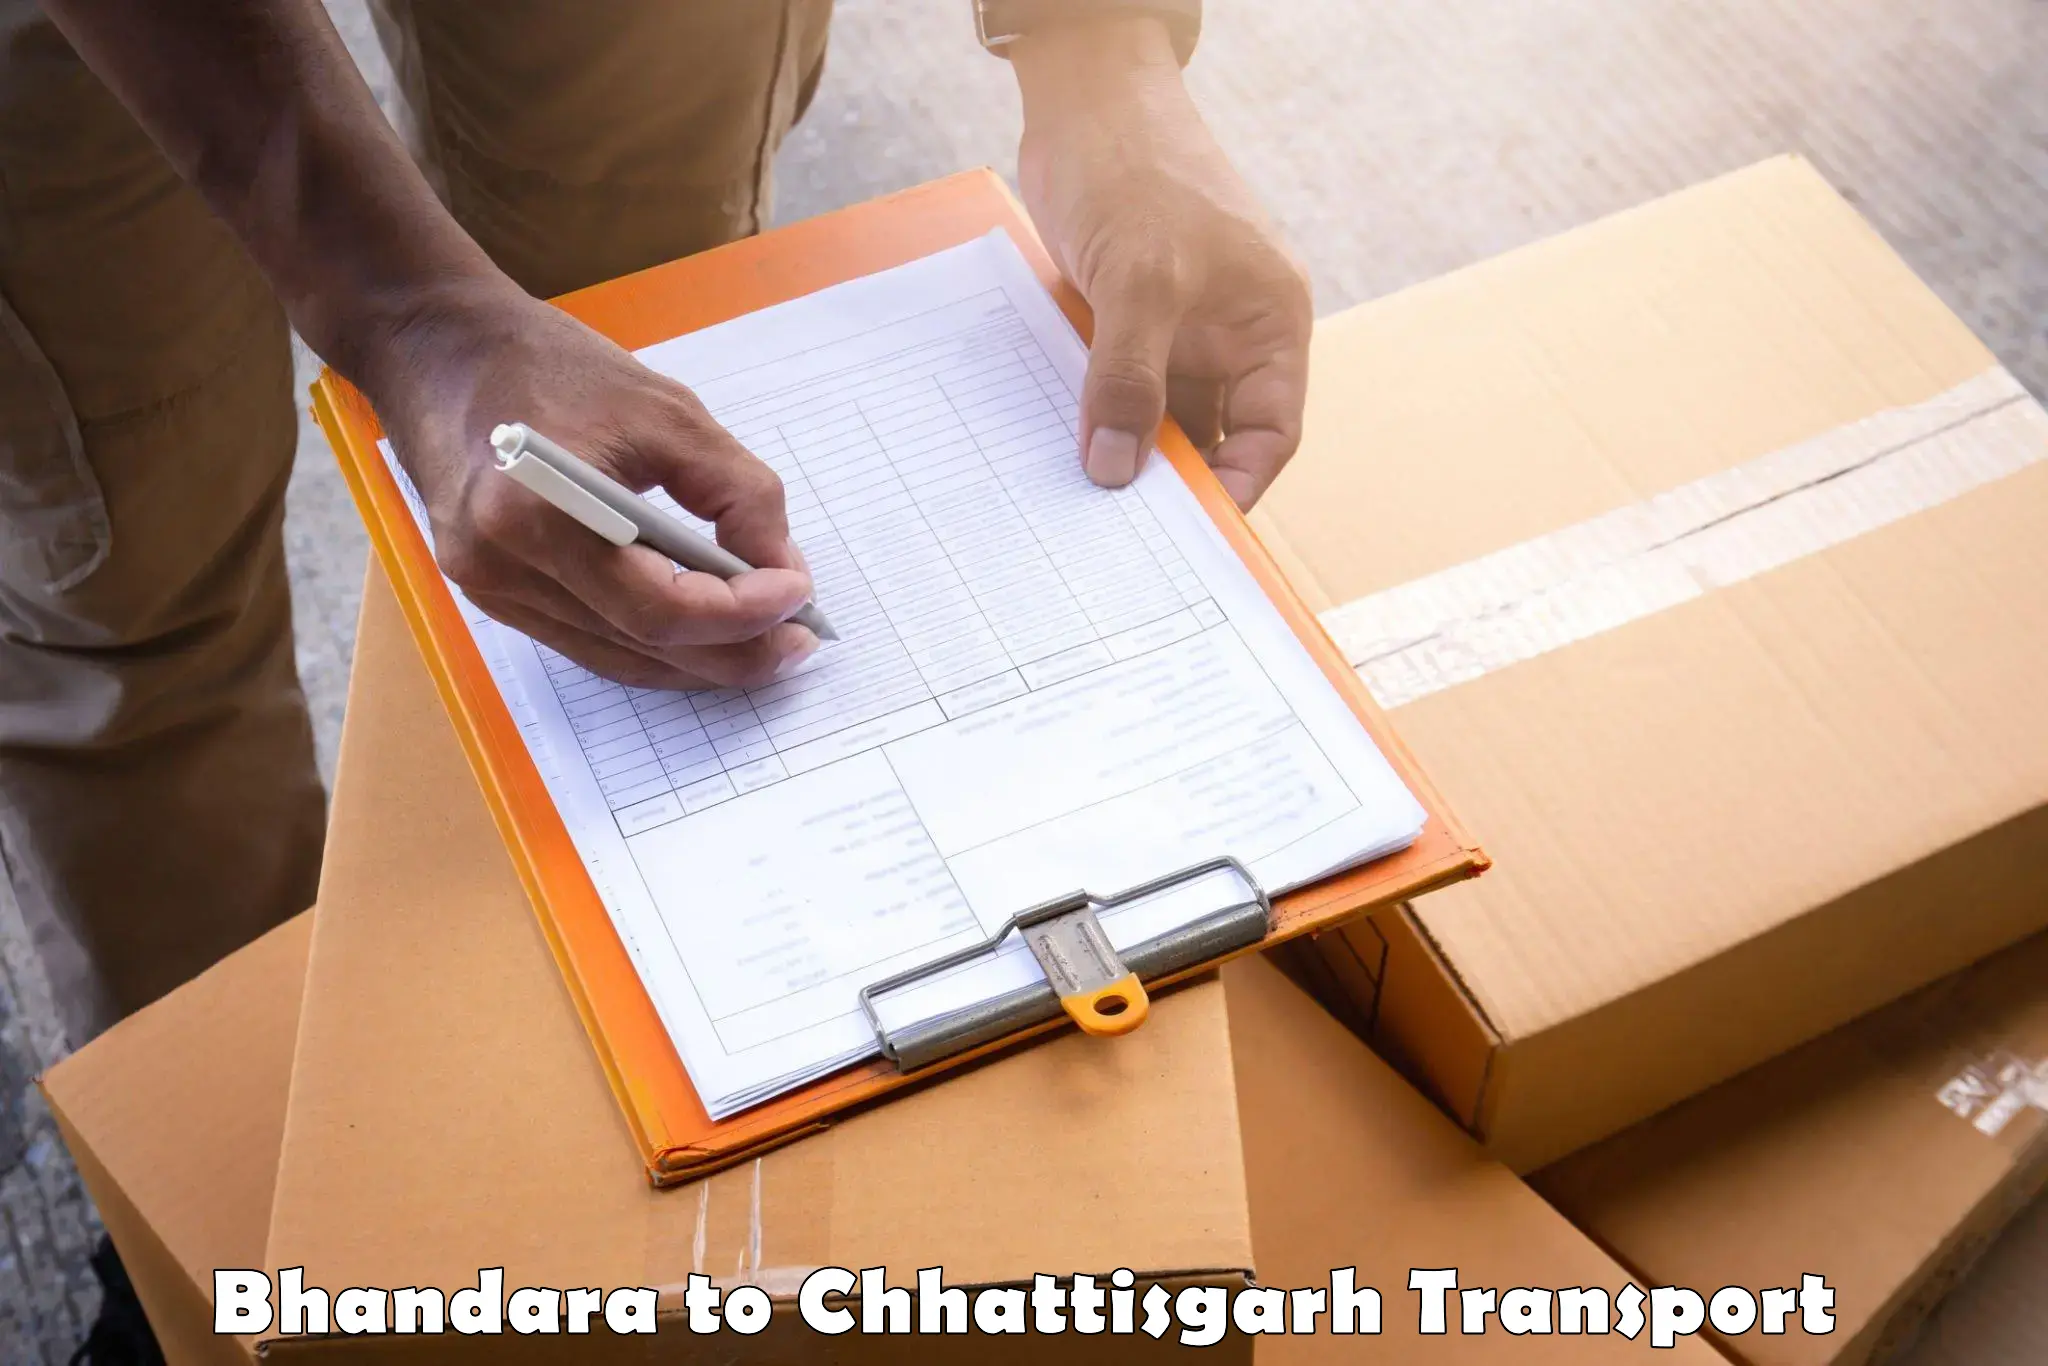 Part load transport service in India Bhandara to Mandhar